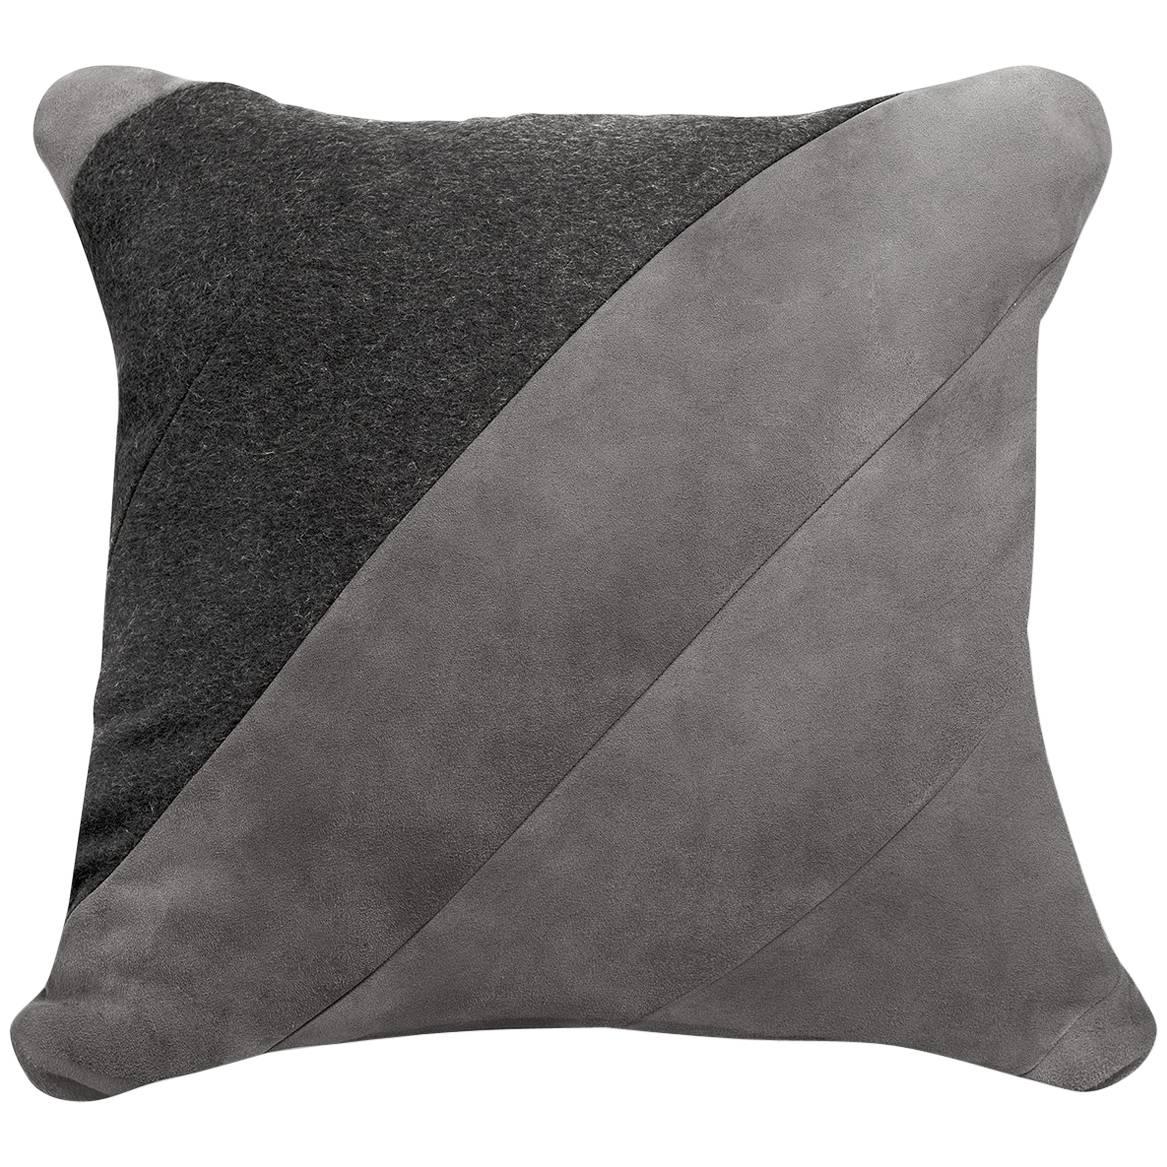 ELAH Wool and Suede Pillow For Sale